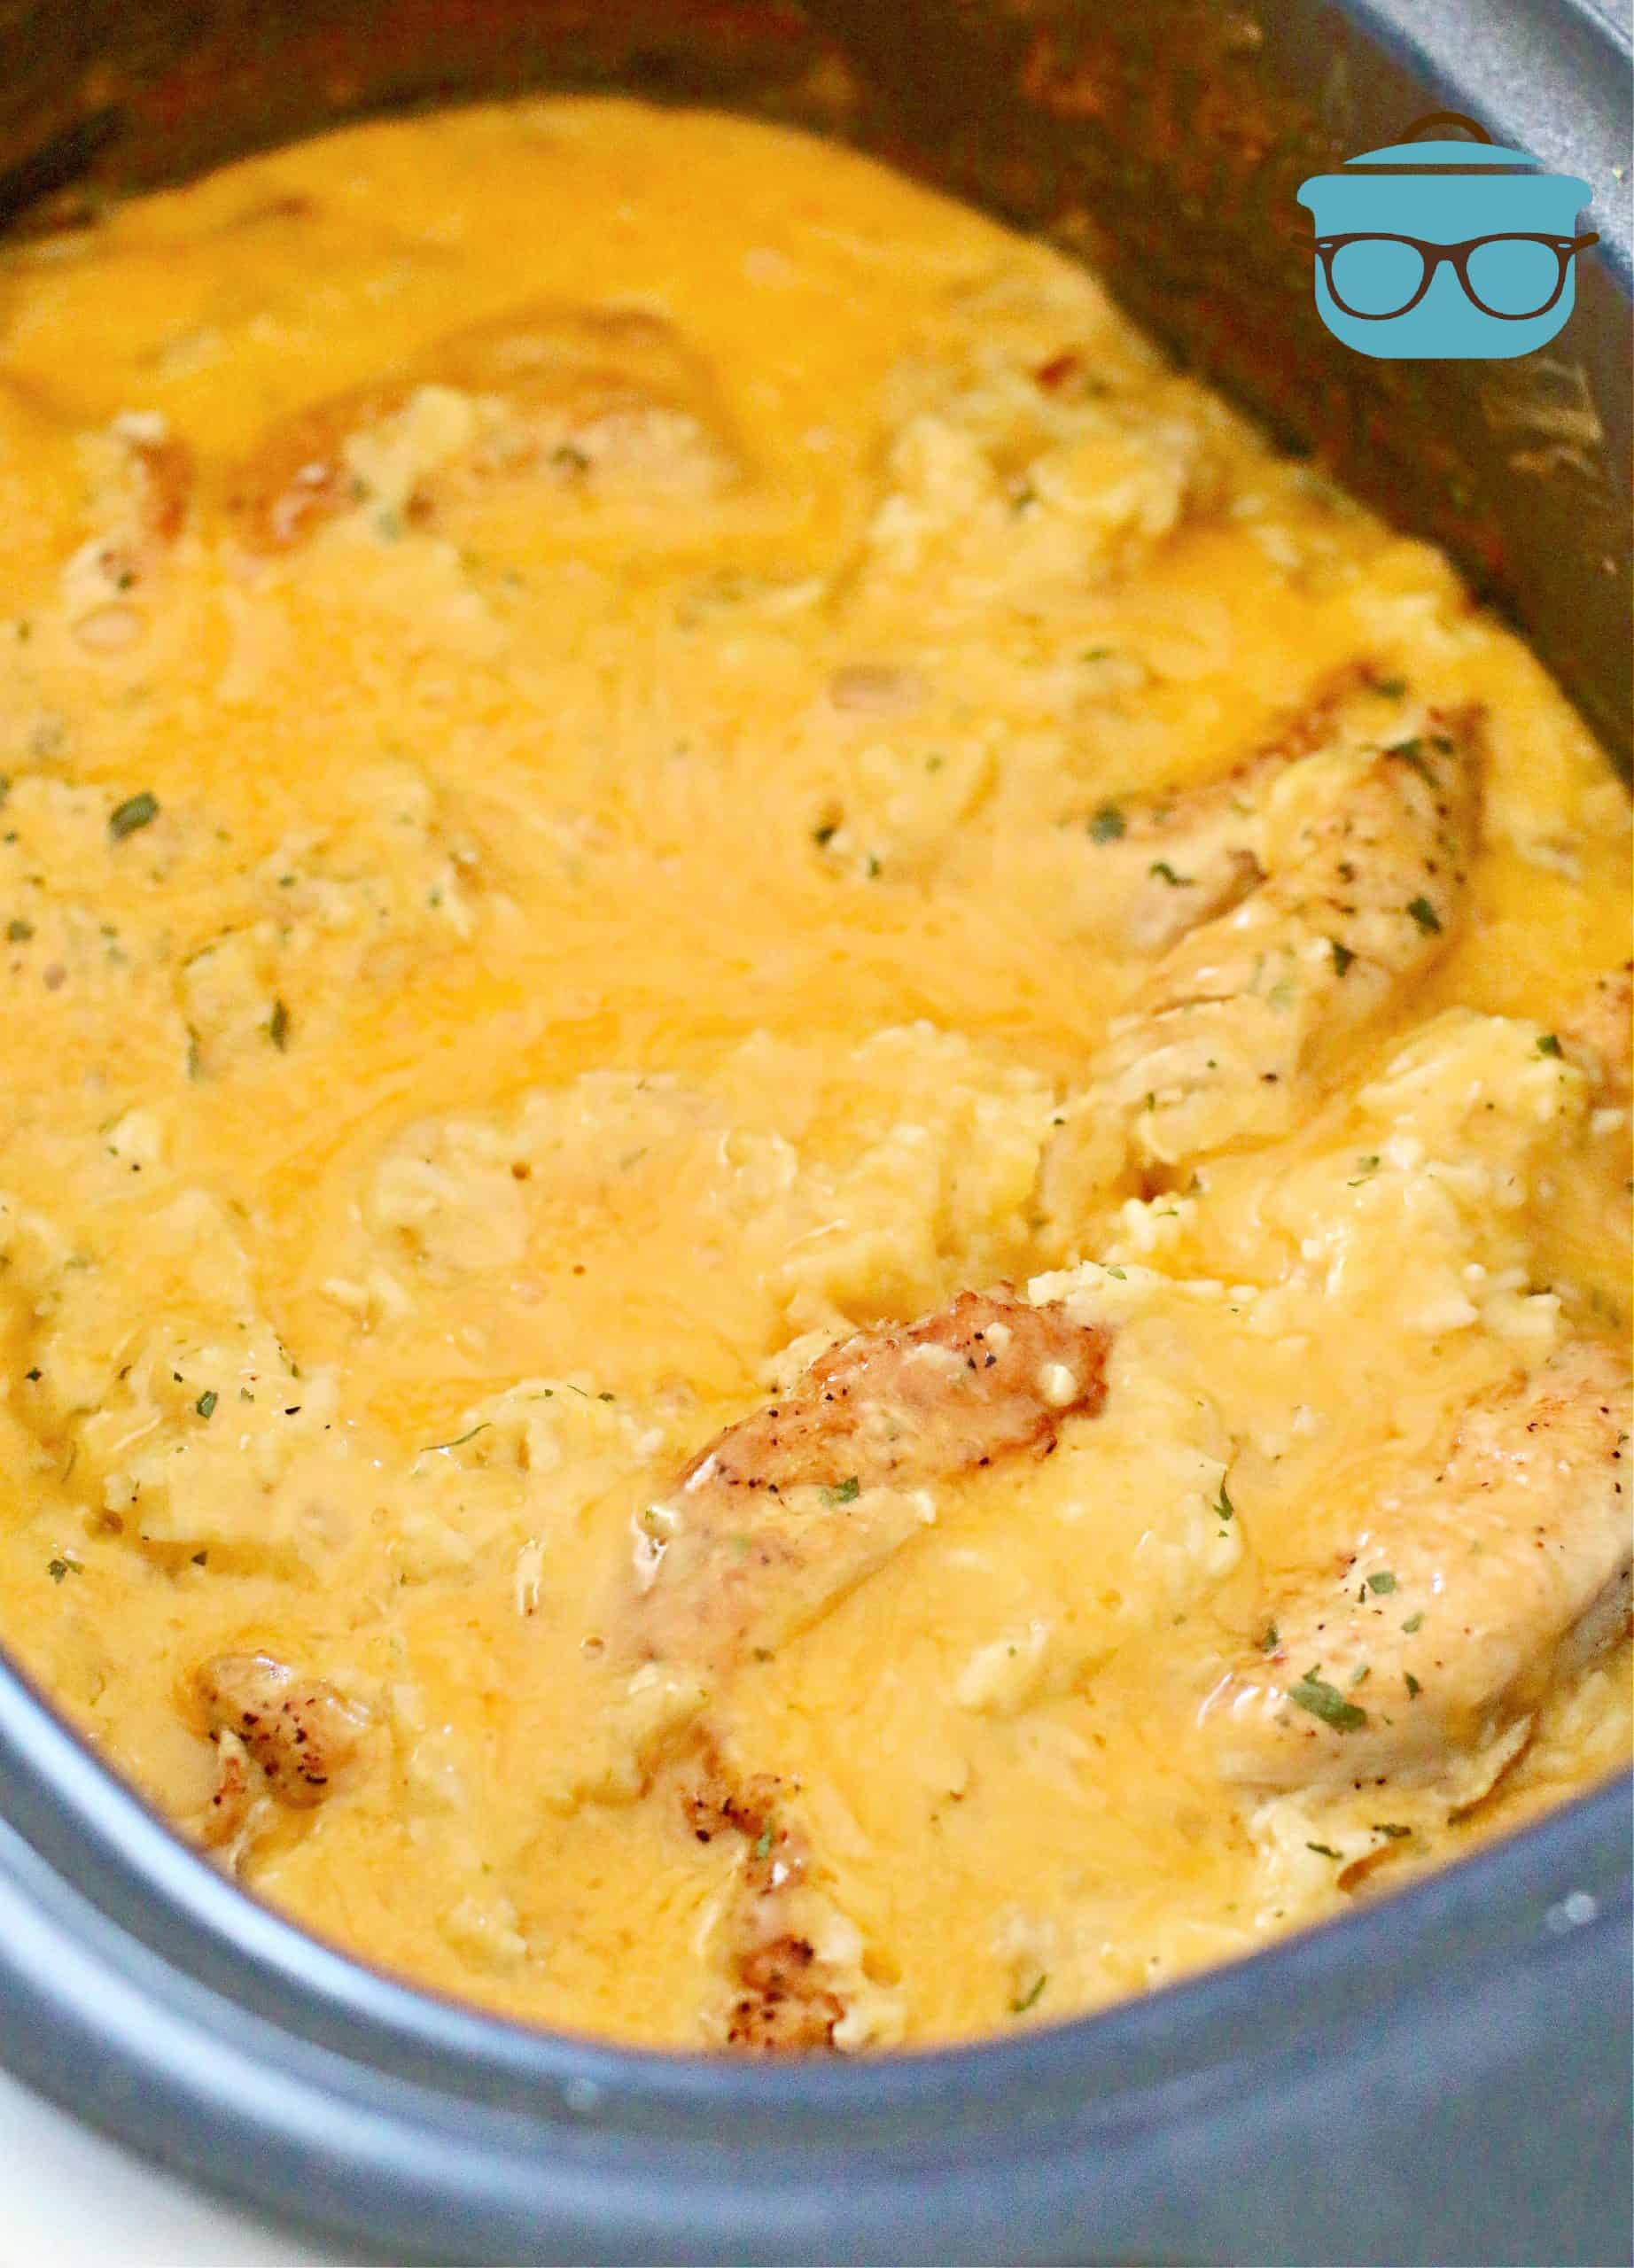 melted cheese shown over chicken and rice in slow cooker.